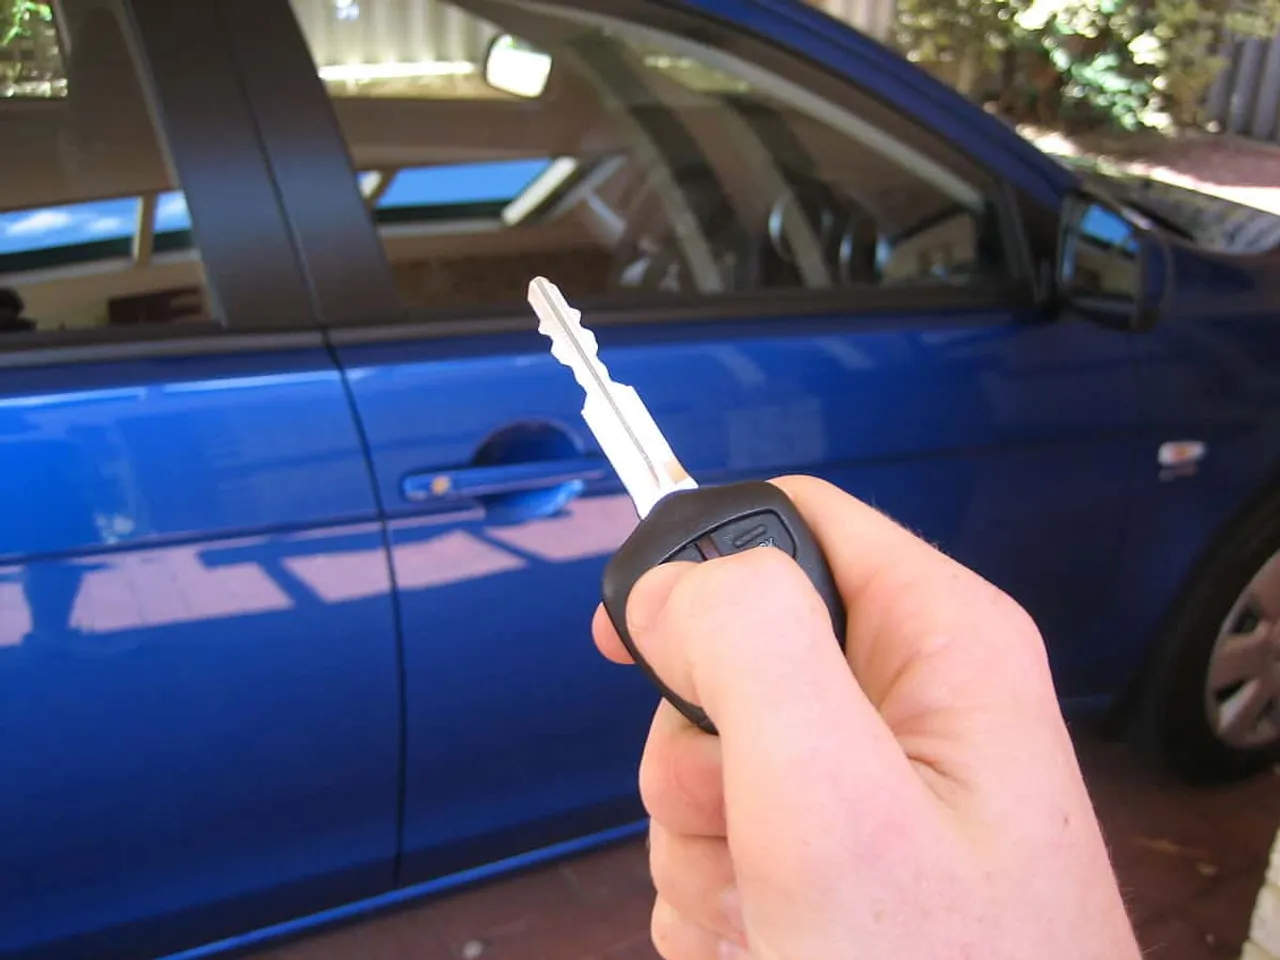 Smartkeys to the future Vehicle security, connectivity, and personalization